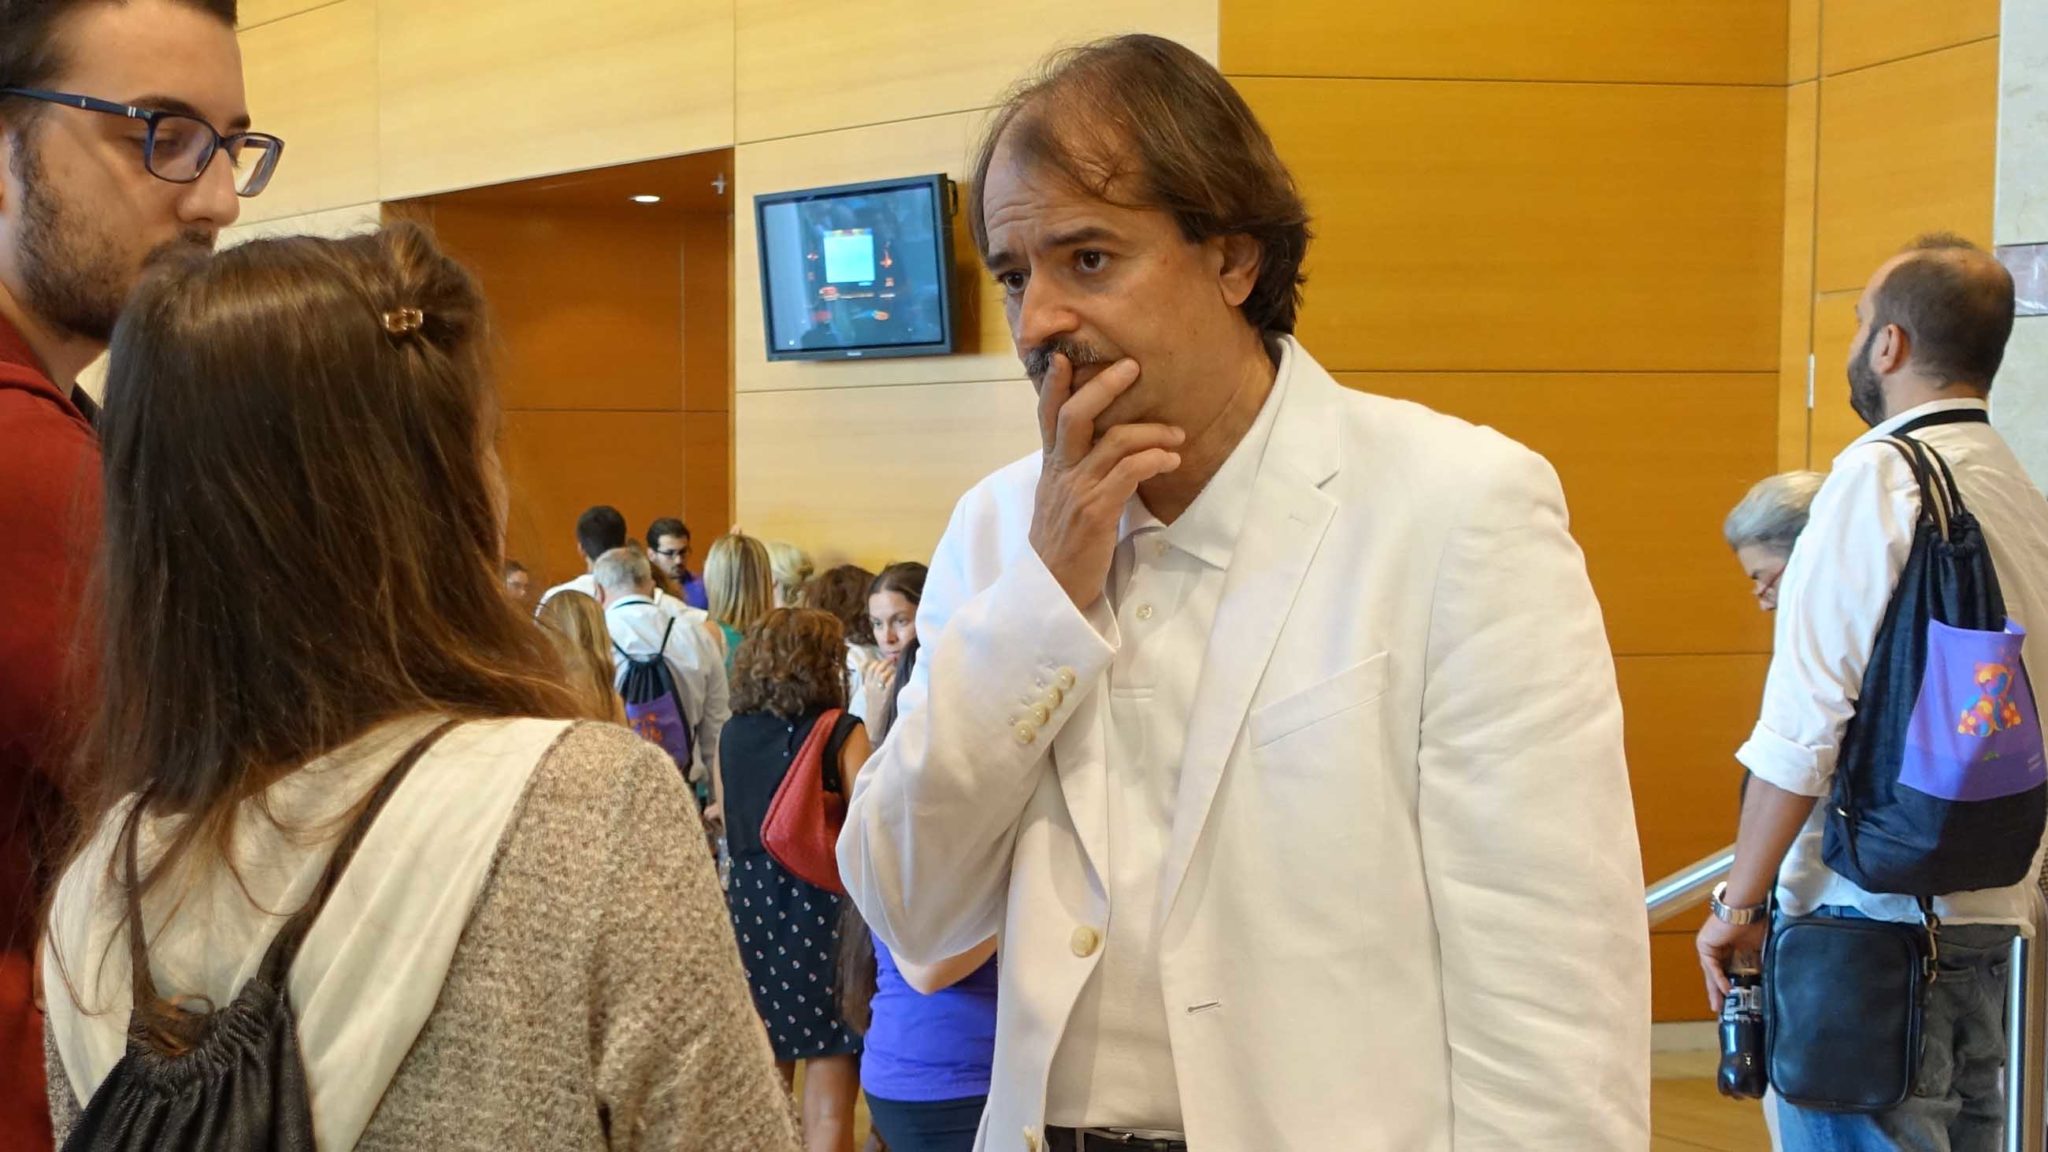 John Ioannidis chats with audience members outside an appearance at a TEDx event in Athens, Greece, in 2015.